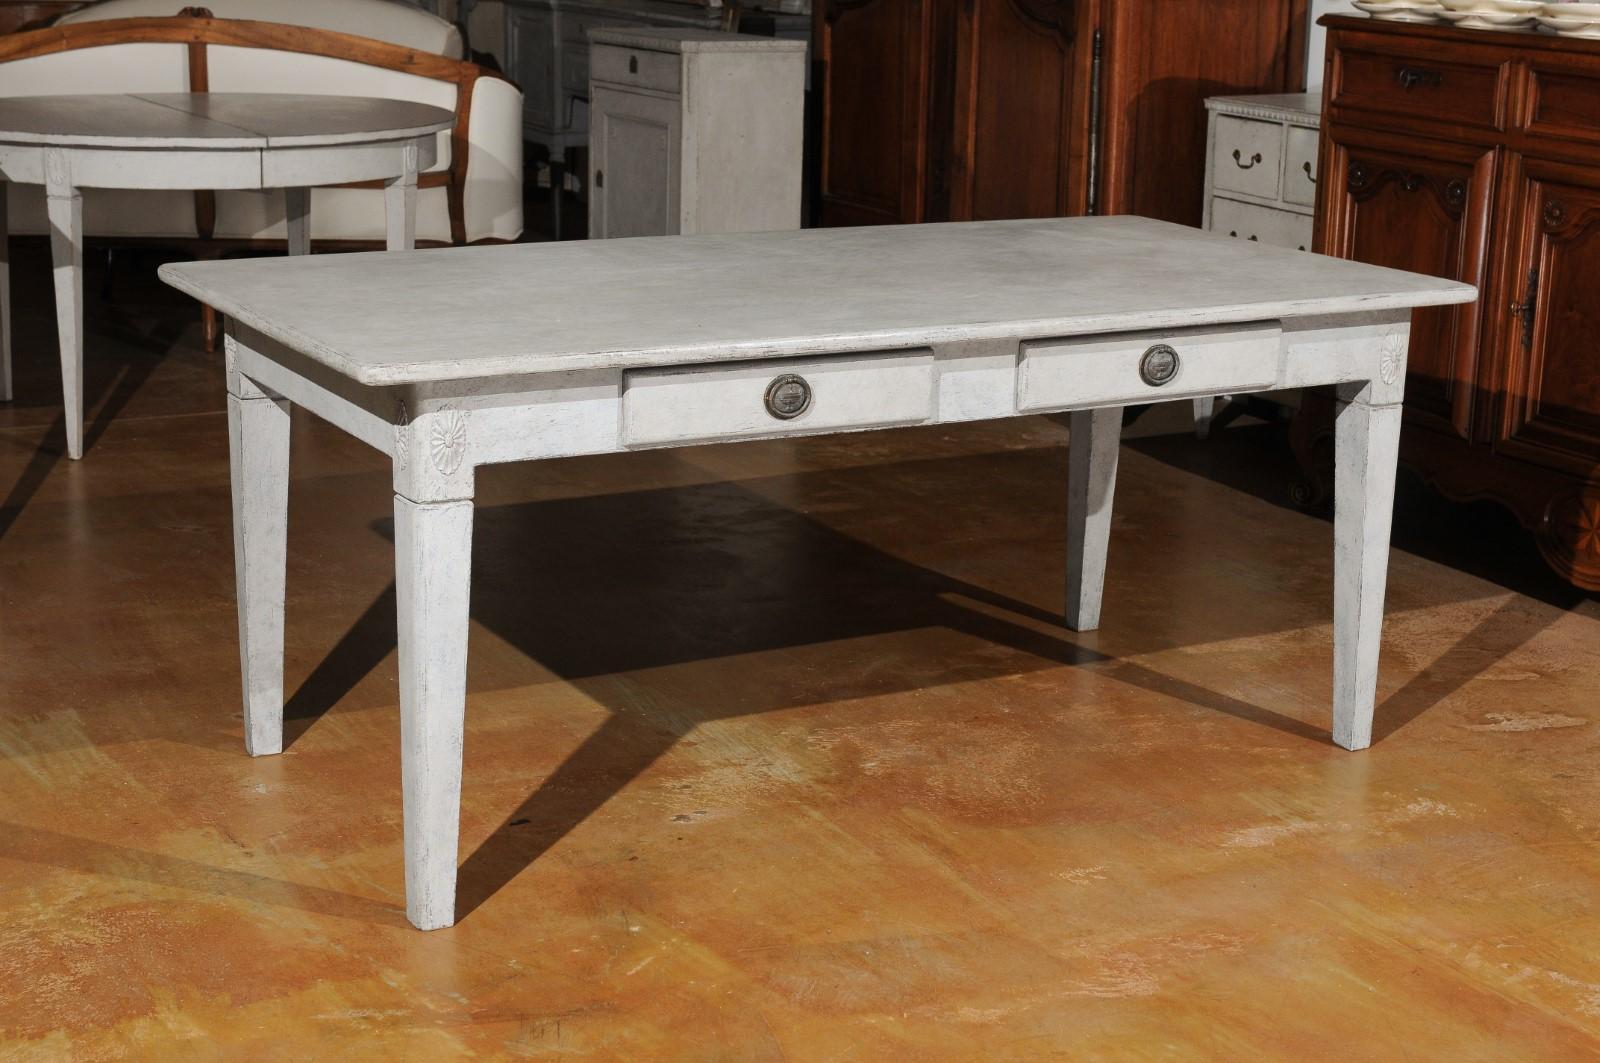 A Swedish Gustavian style painted wood table from the 20th century, with two drawers and carved rosettes. Created in Sweden during the early 20th century, this painted table features a rectangular top sitting above two drawers fitted with classical